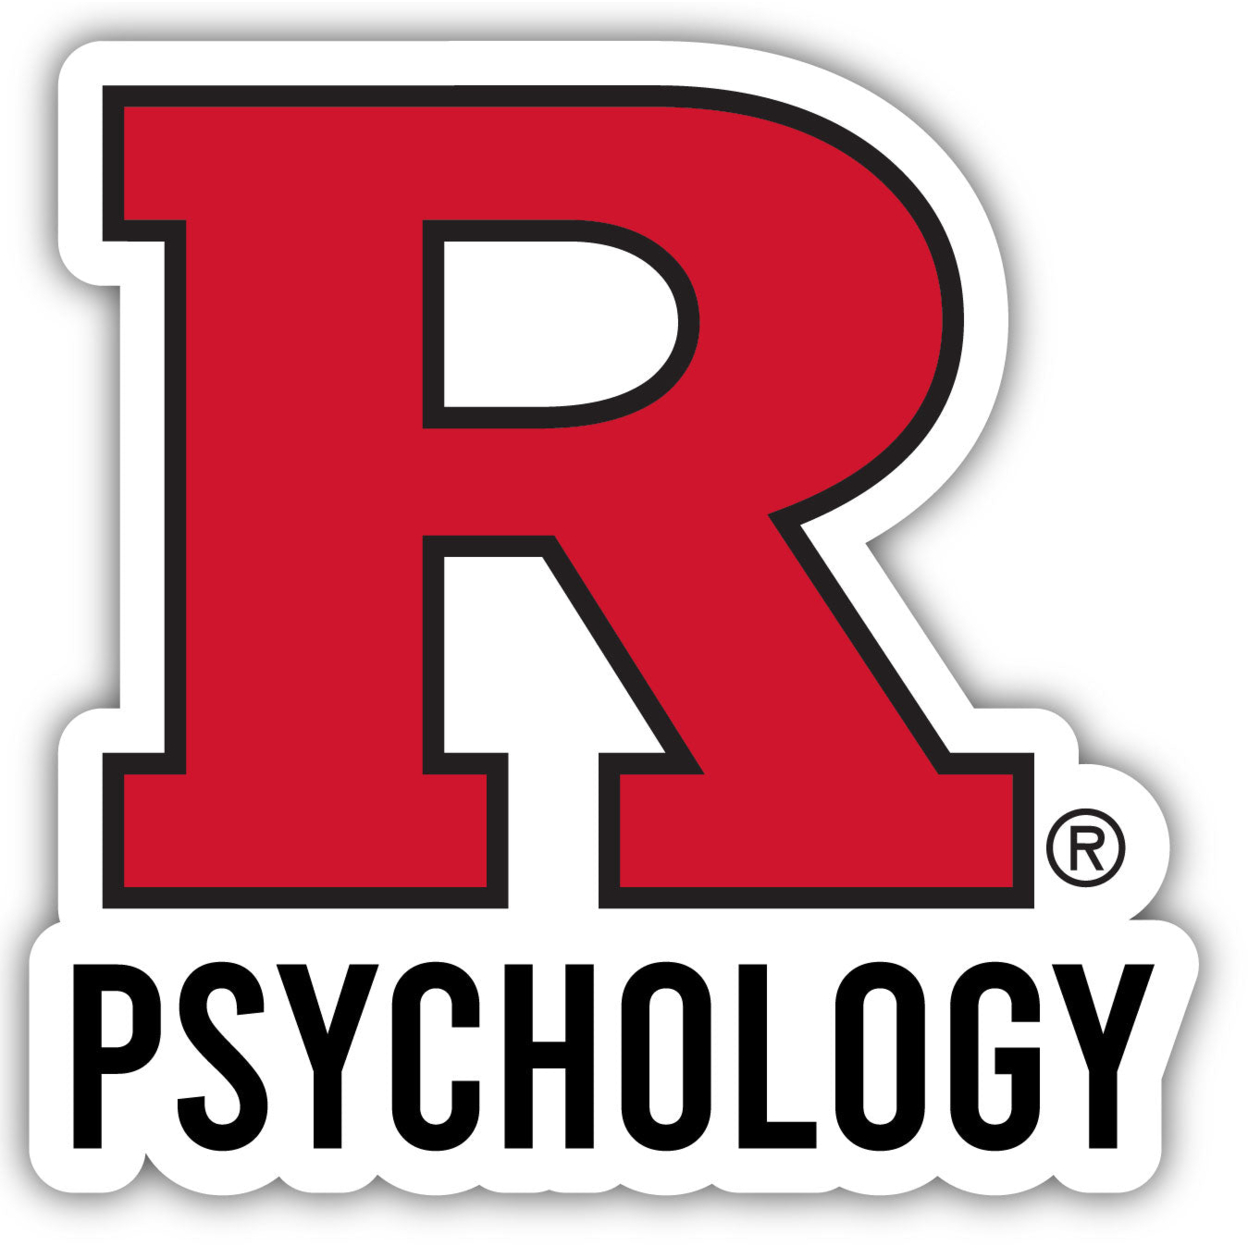 Rutgers University Scarlet Knights Psychology Decal Die Cut Sticker Choice Of Size - 2 Inch